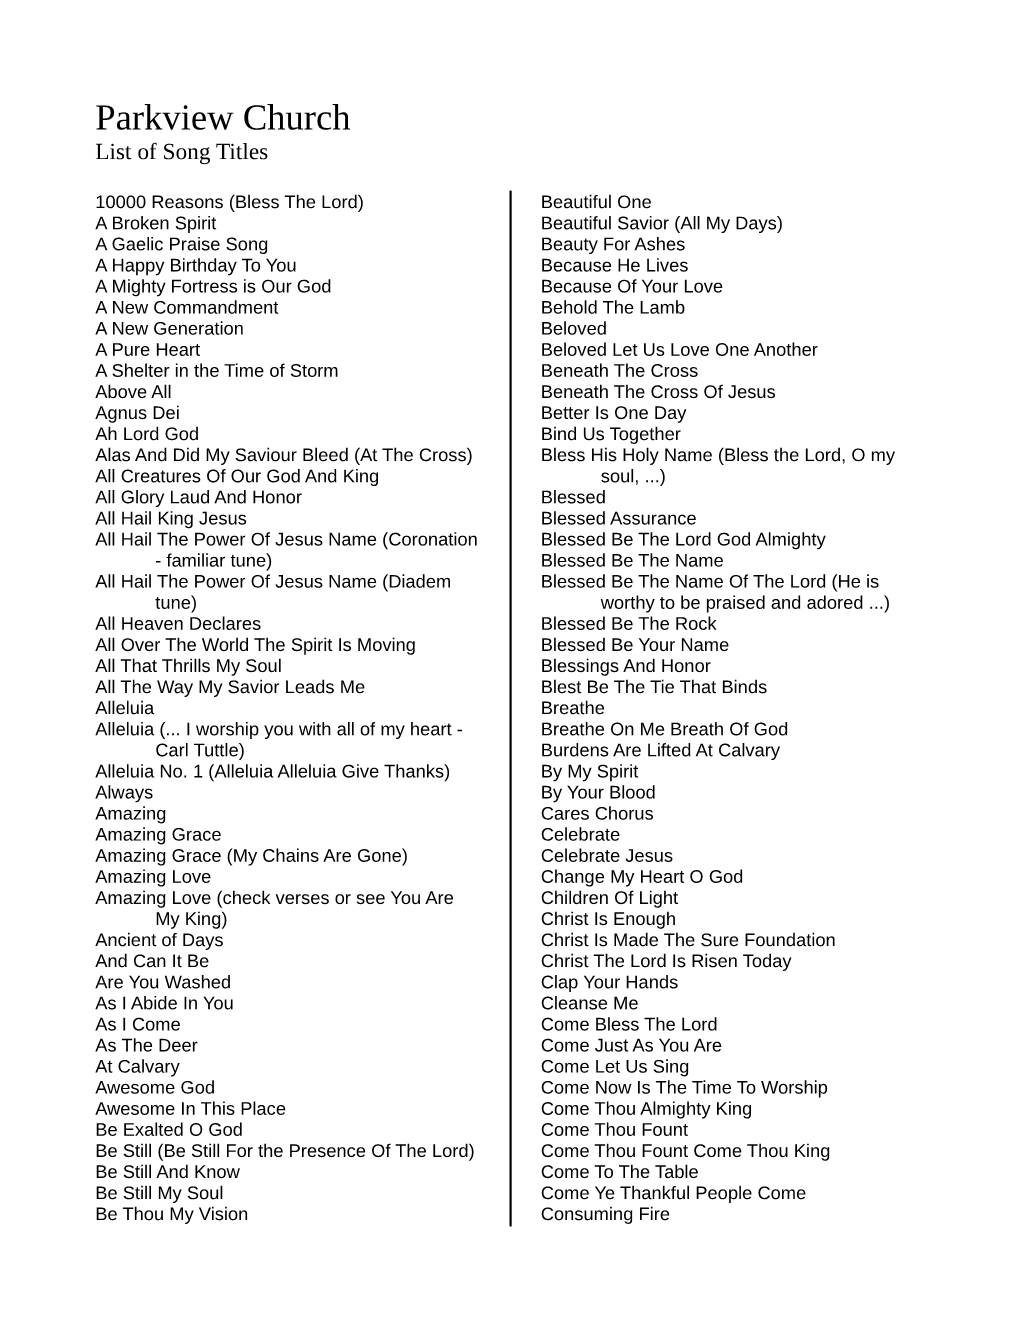 Download a List of All the Song Titles